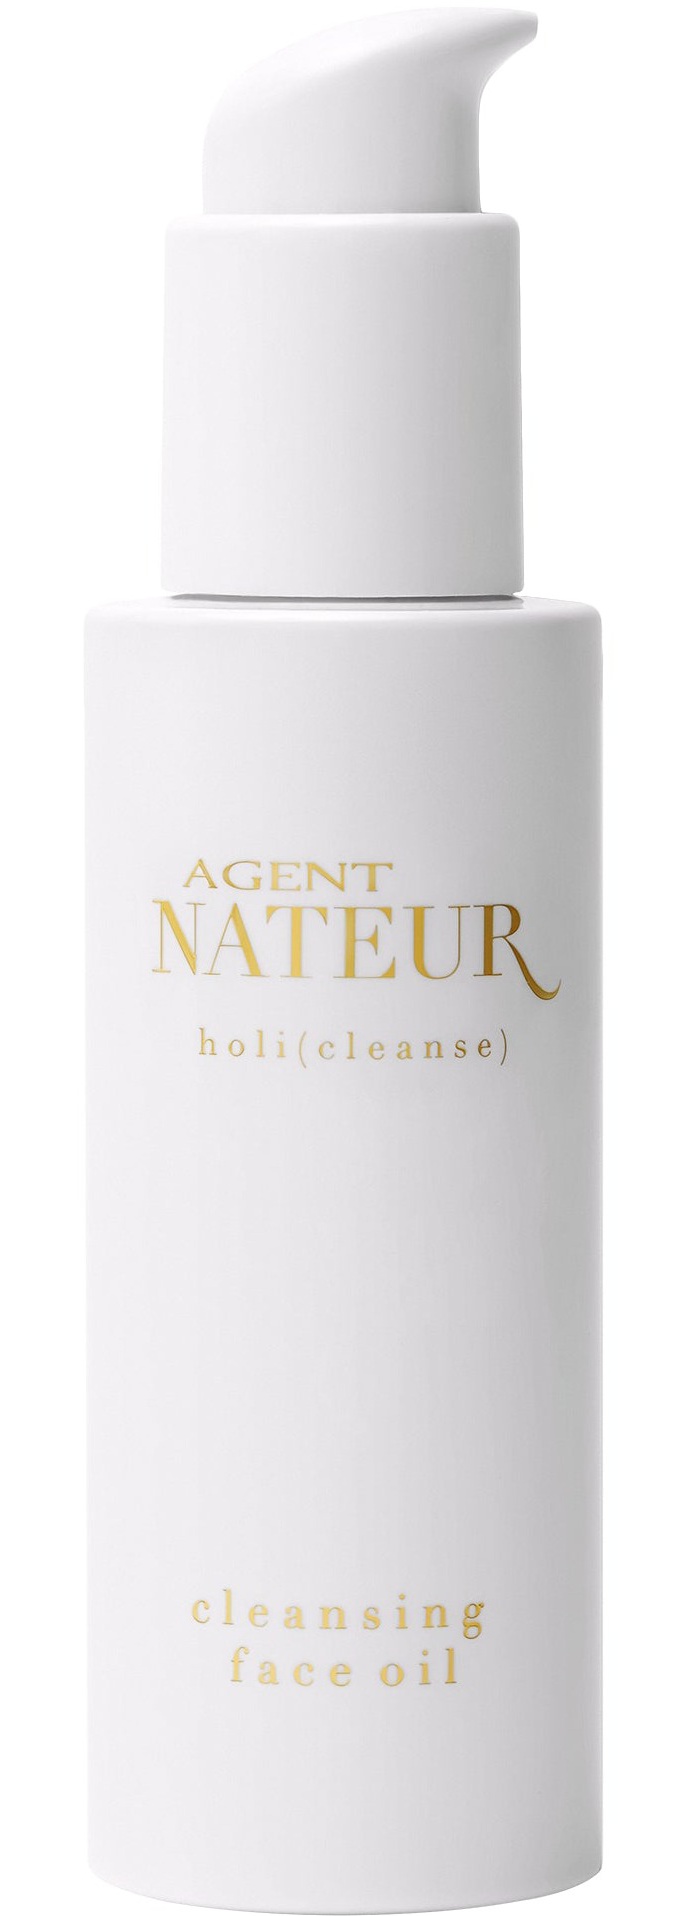 Agent Nateur H O L I ( C L E A N S E ) Cleansing Face Oil Makeup Remover